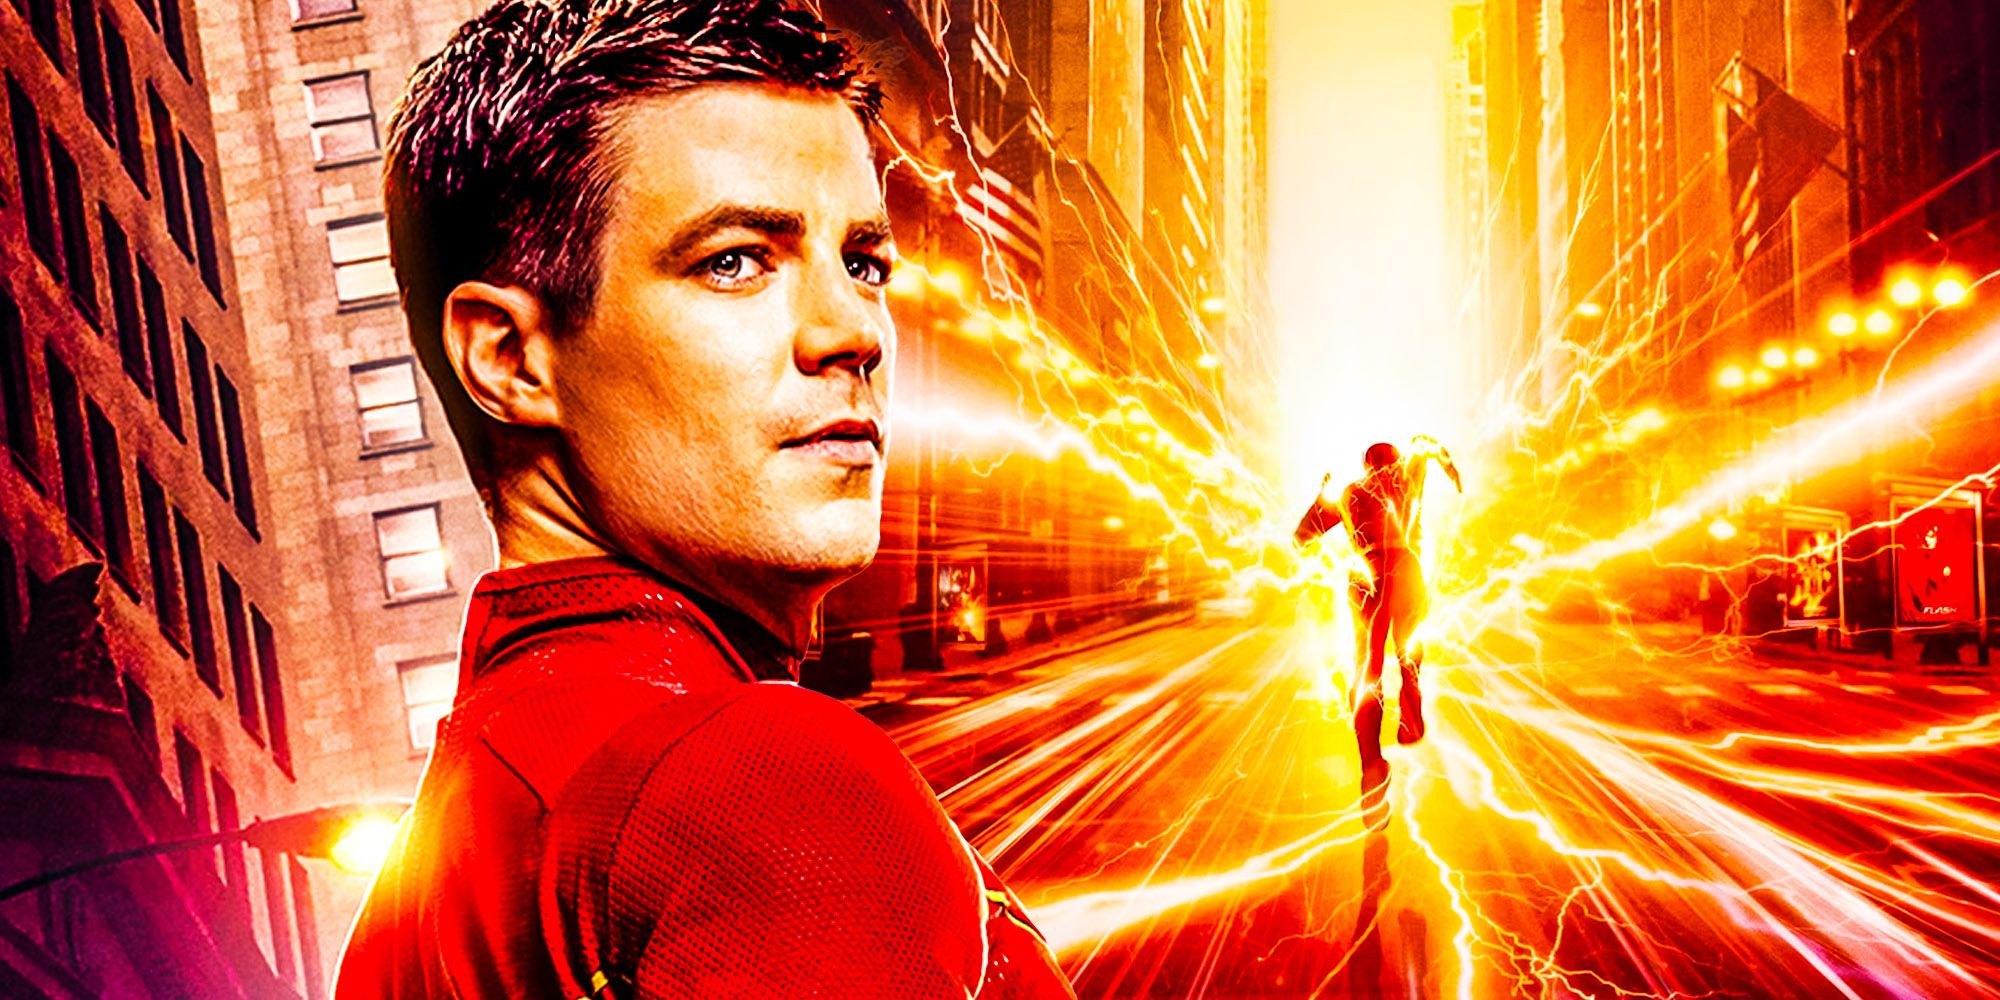 Custom image of Grant Gustin's Barry Allen on the left with his face visible and The Flash running away from the camera, with lots of lightining behind, on the right.